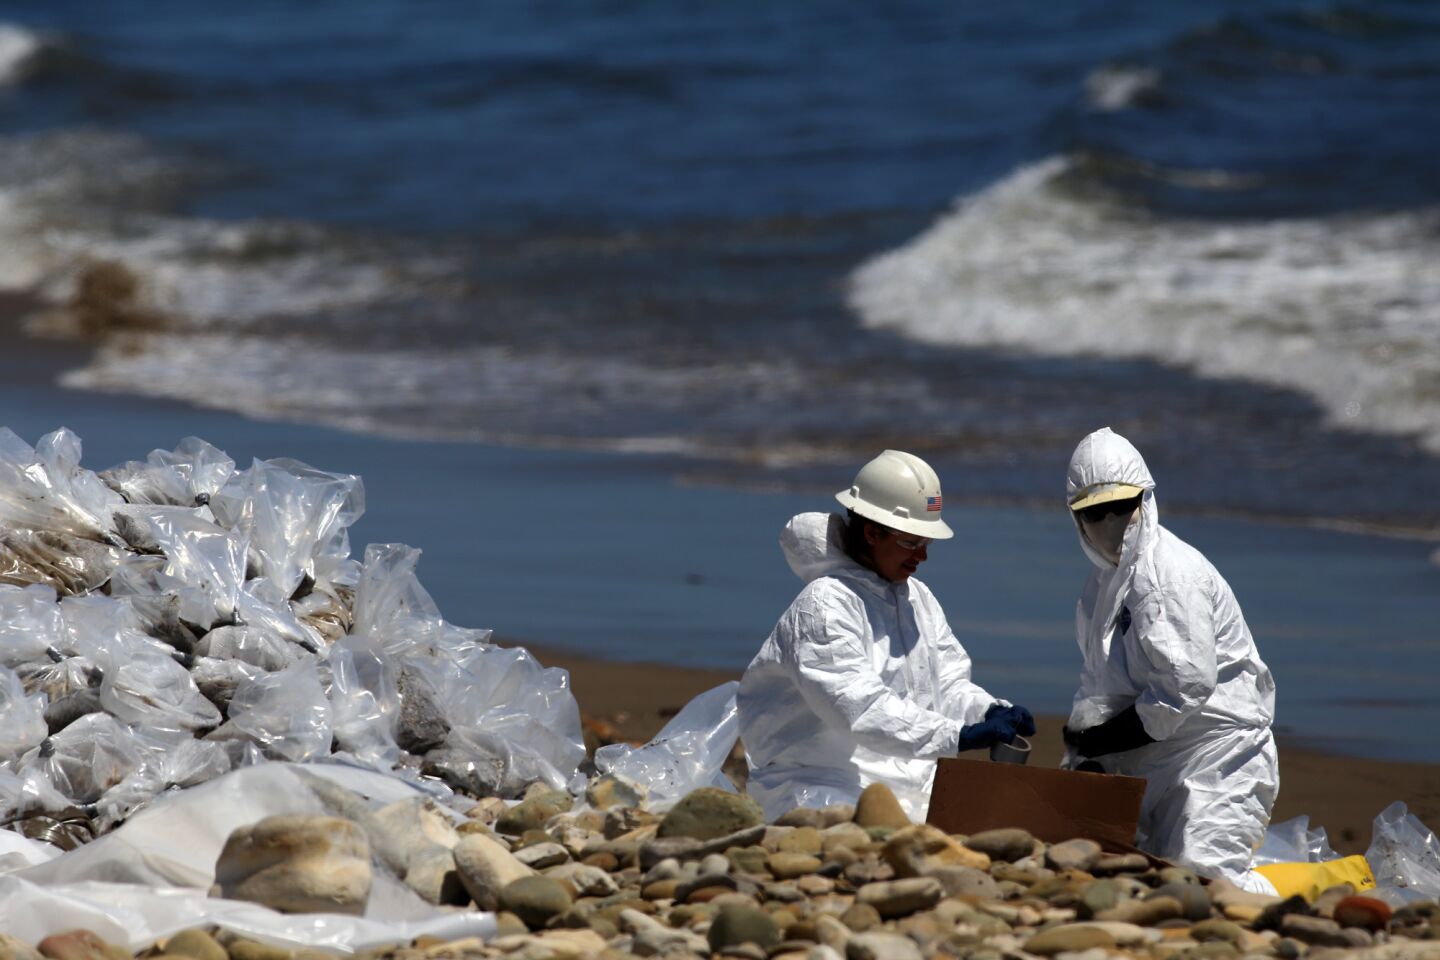 Suited cleanup workers bag oiled sand and rocks on the shoreline at Refugio State Beach near Santa Barbara.